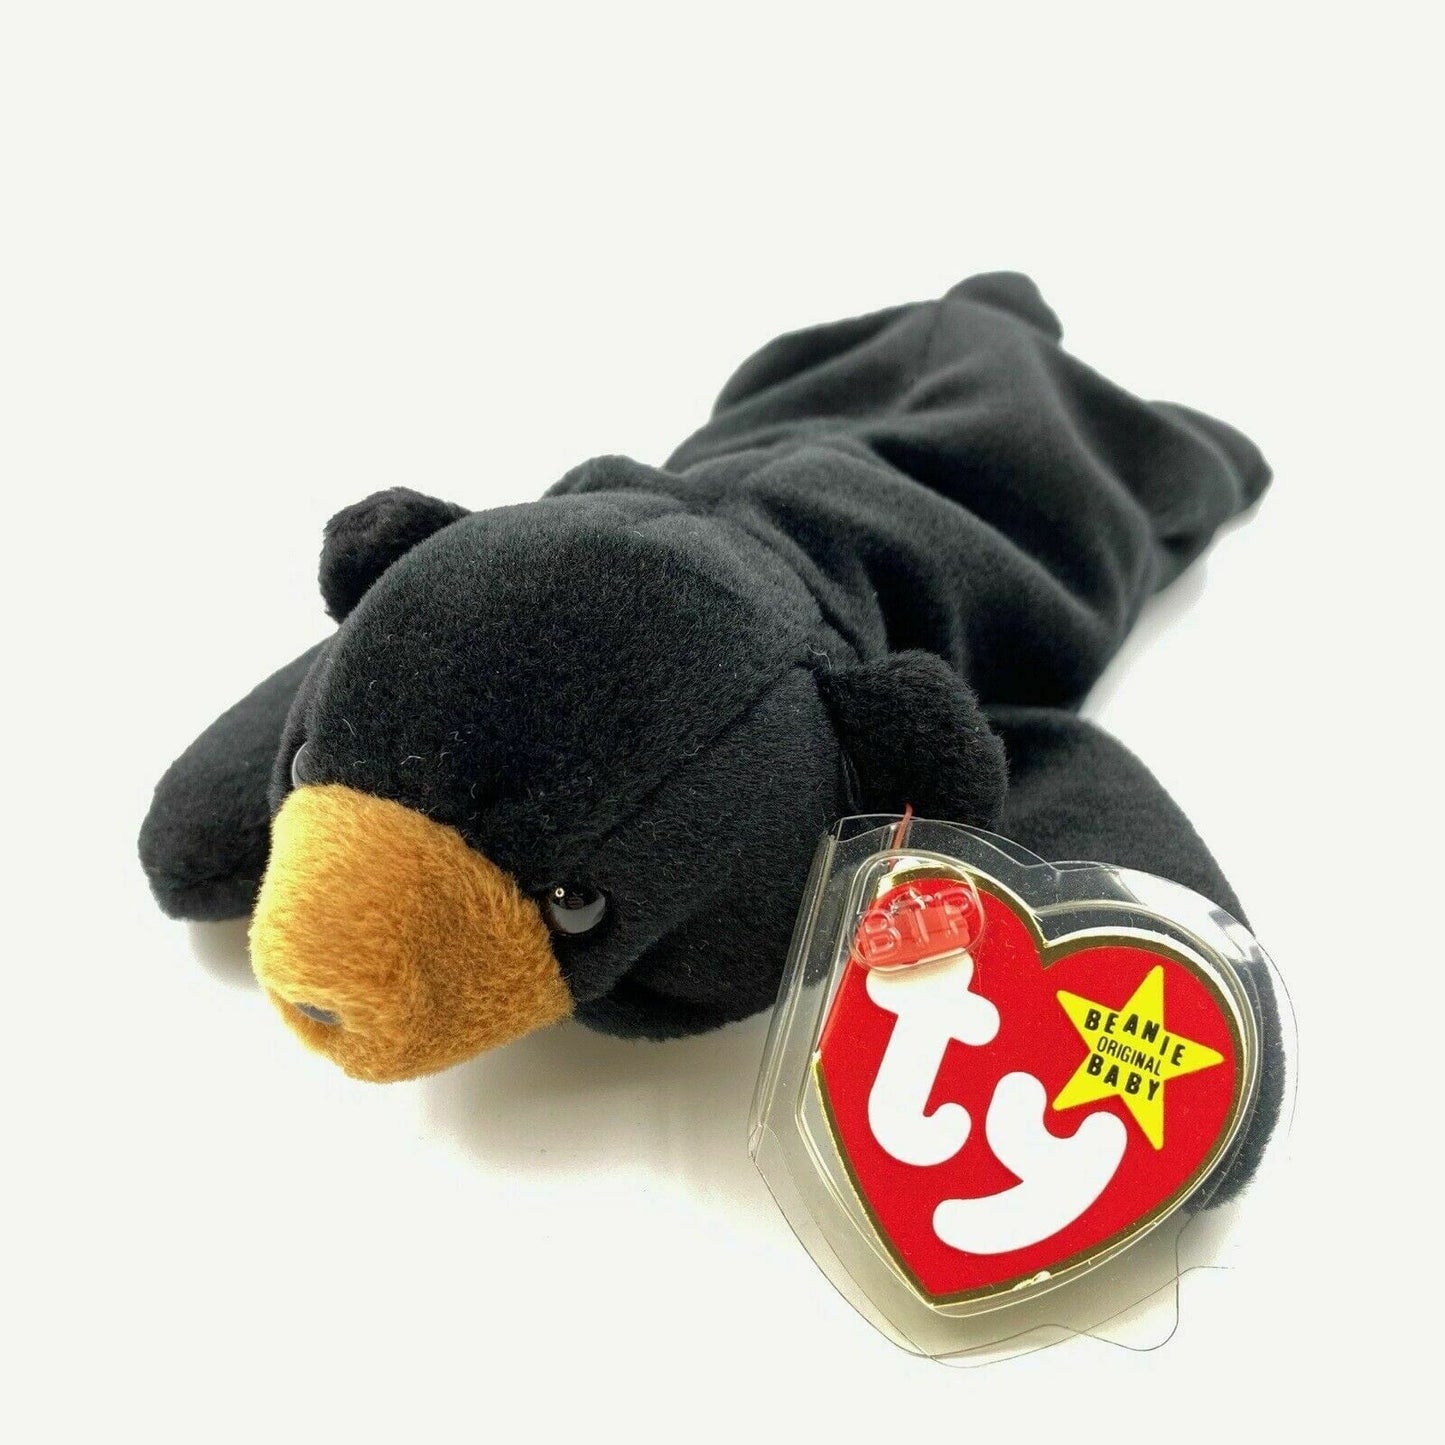 Ty Original Beanie Babies Blackie The Bear 1994 - 4011 Excellent Cond. w/ Errors